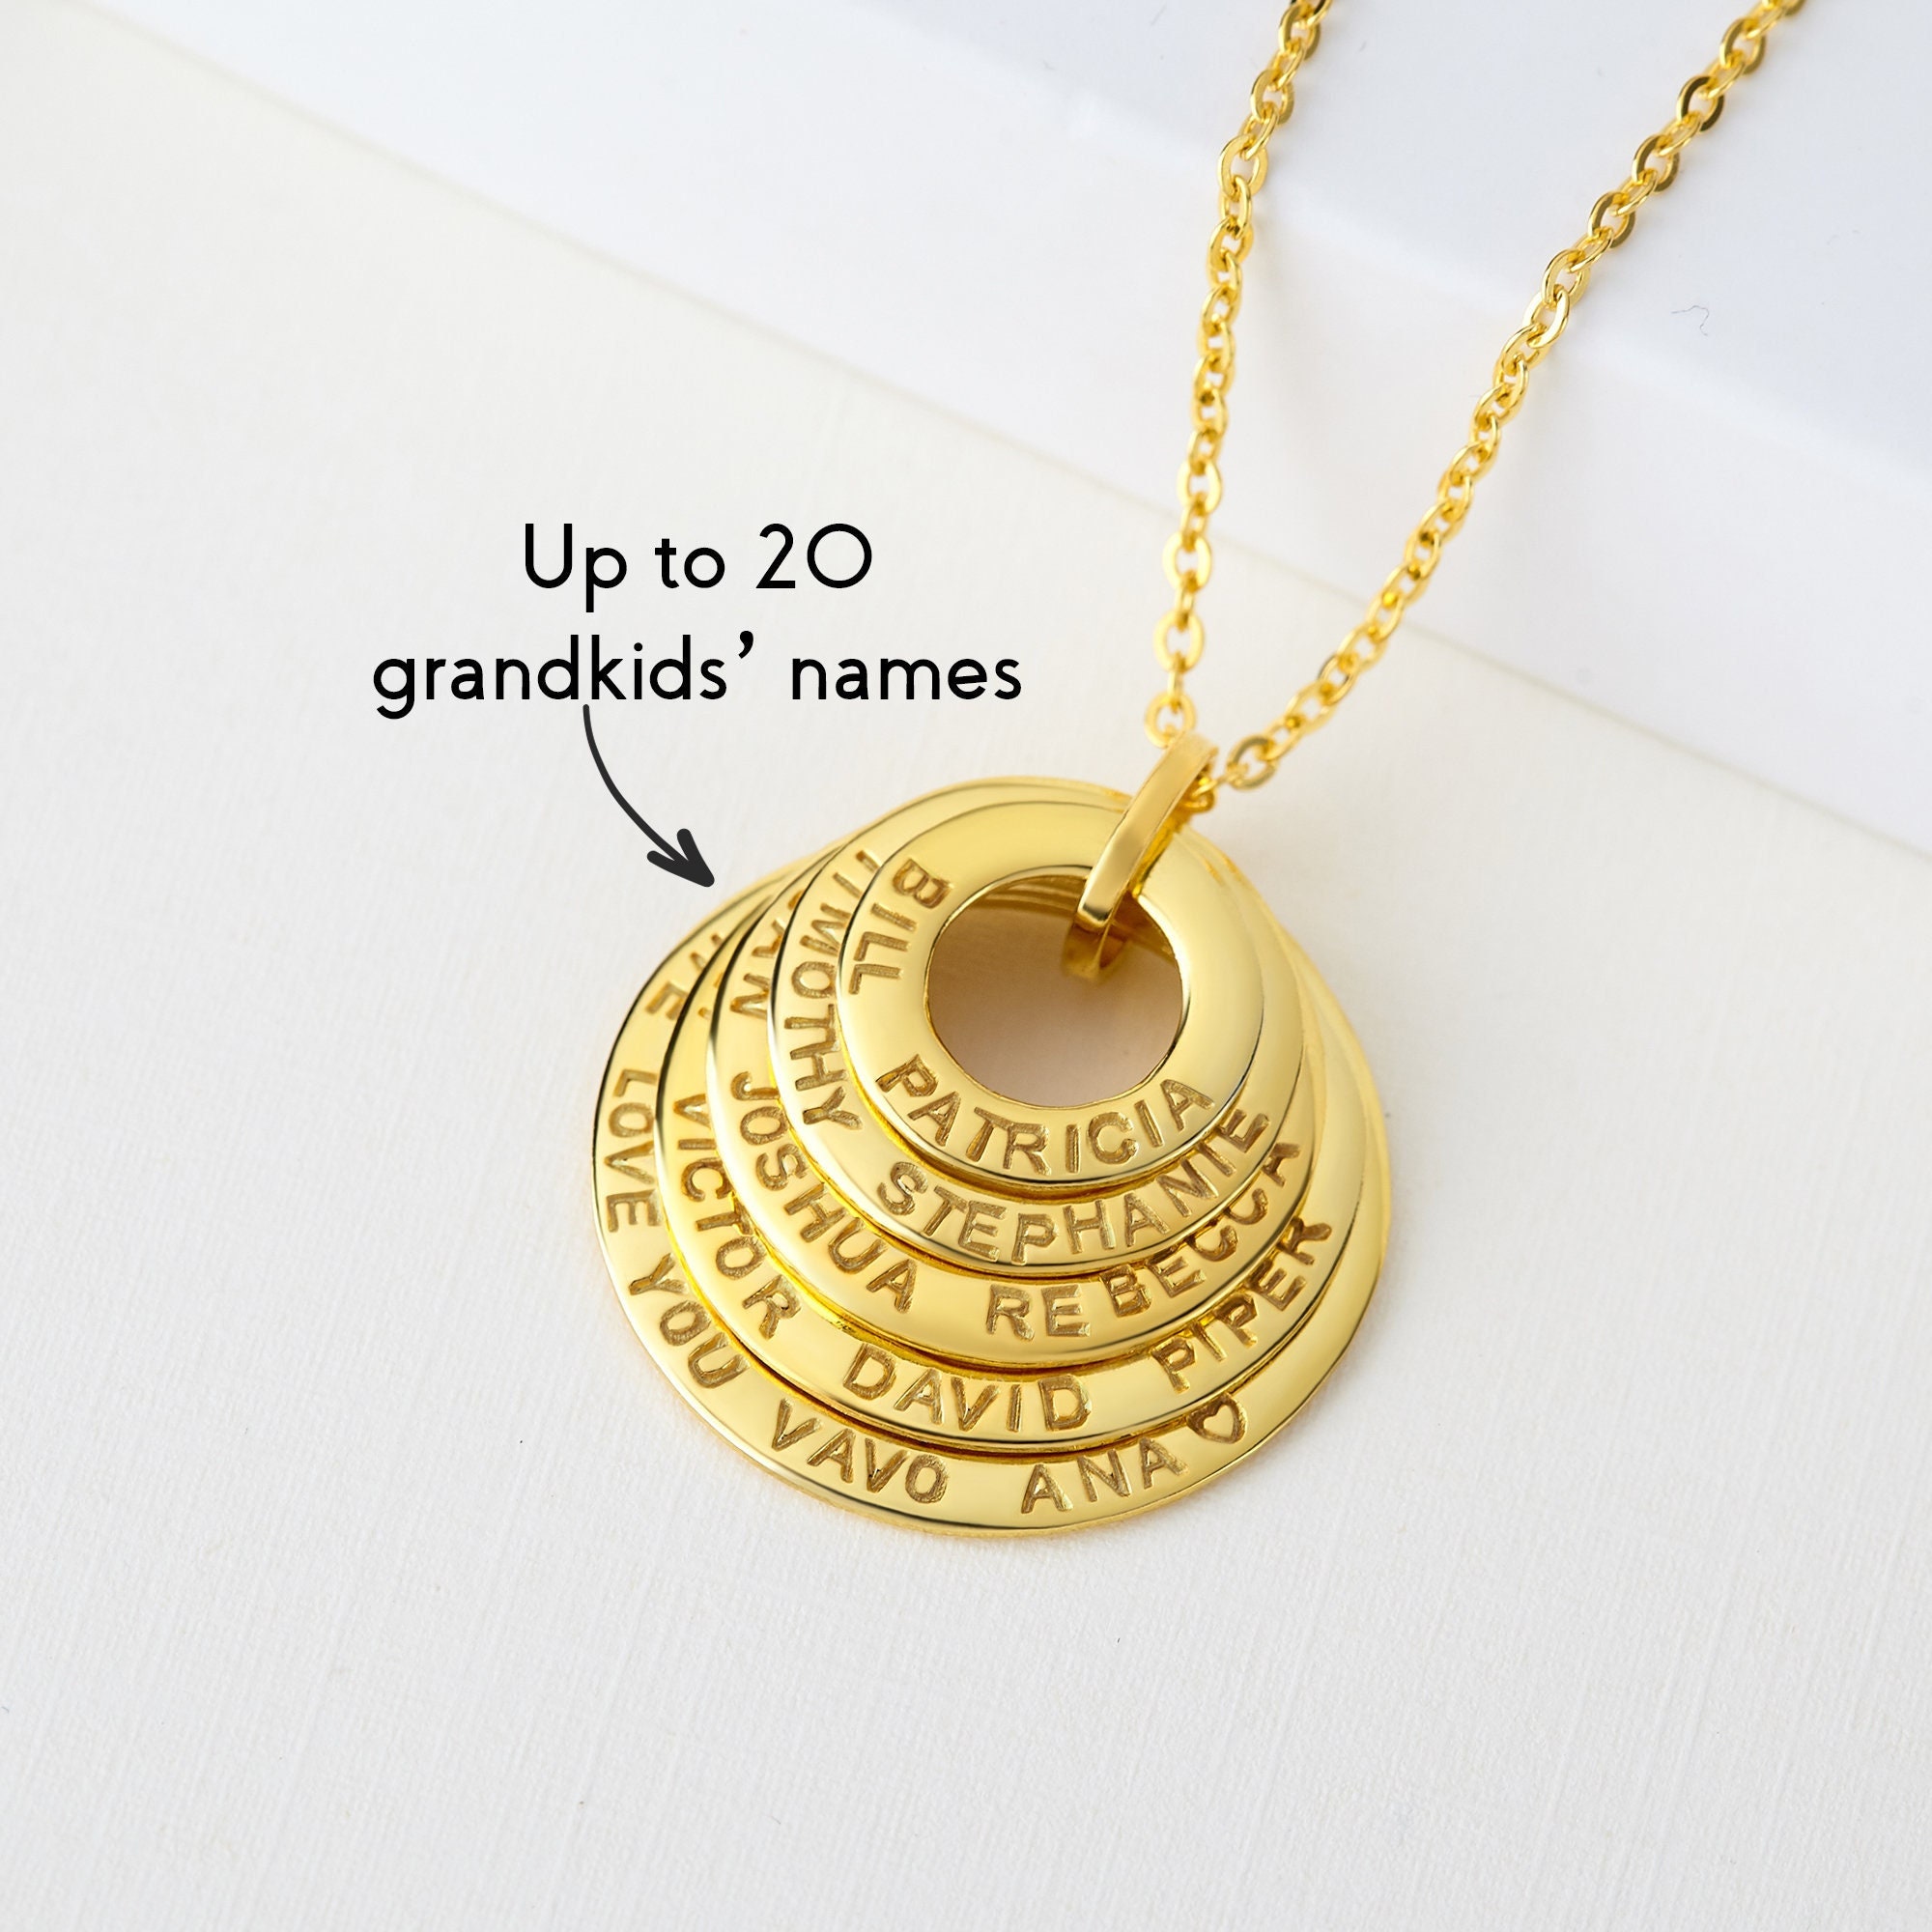 Muse Infinite Grandmother Grandson Necklace Gifts for Grandma Gifts for Grandmother Necklace Grandmother Jewelry Grandma Jewelry Gifts from Grandson